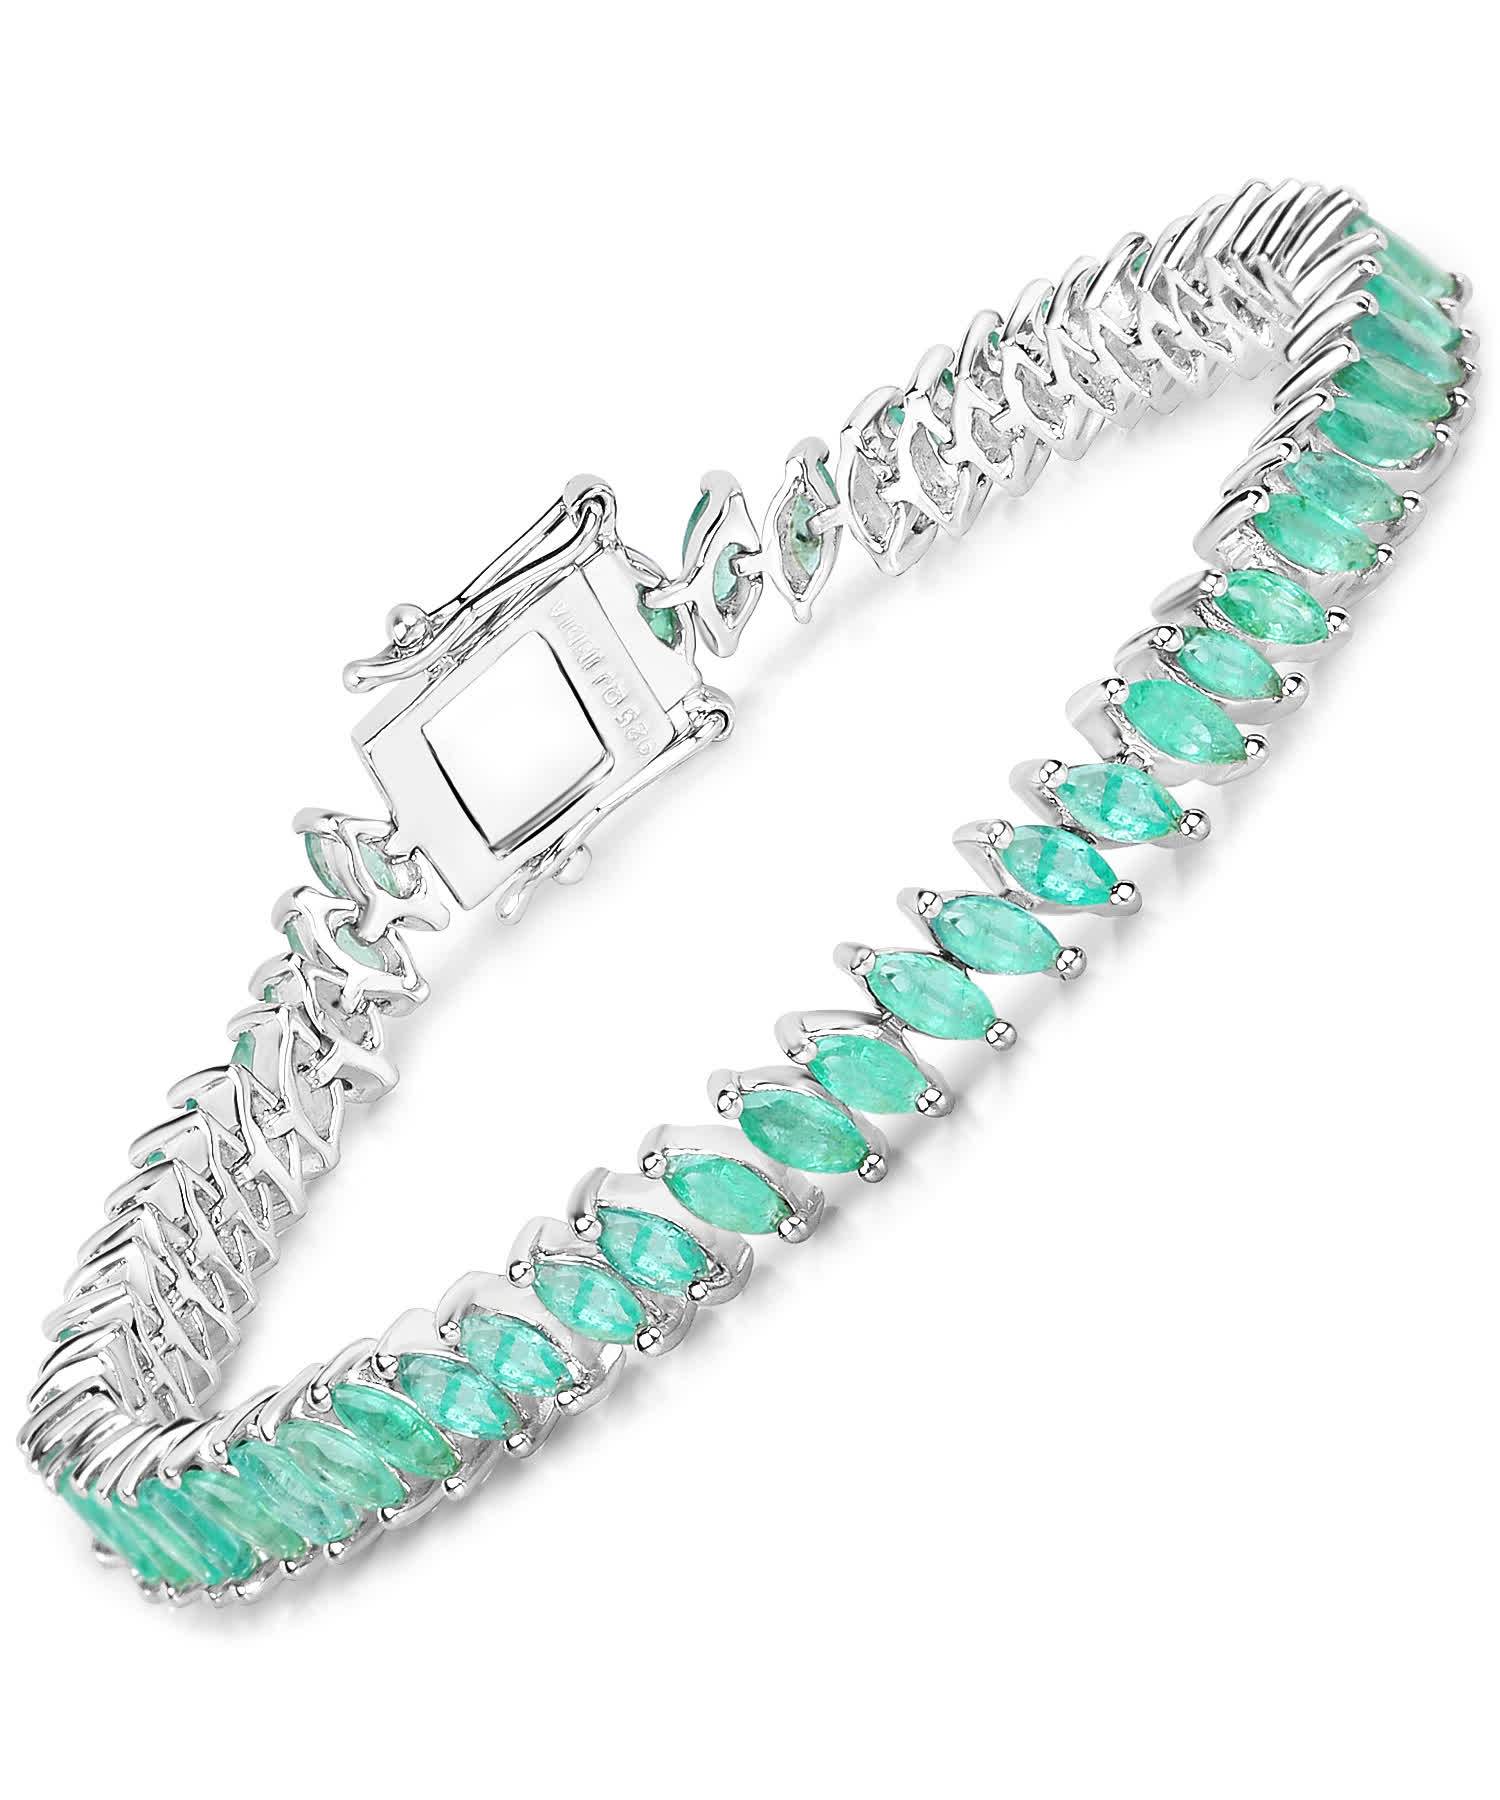 6.82ctw Natural Emerald Rhodium Plated 925 Sterling Silver Tennis Bracelet View 1